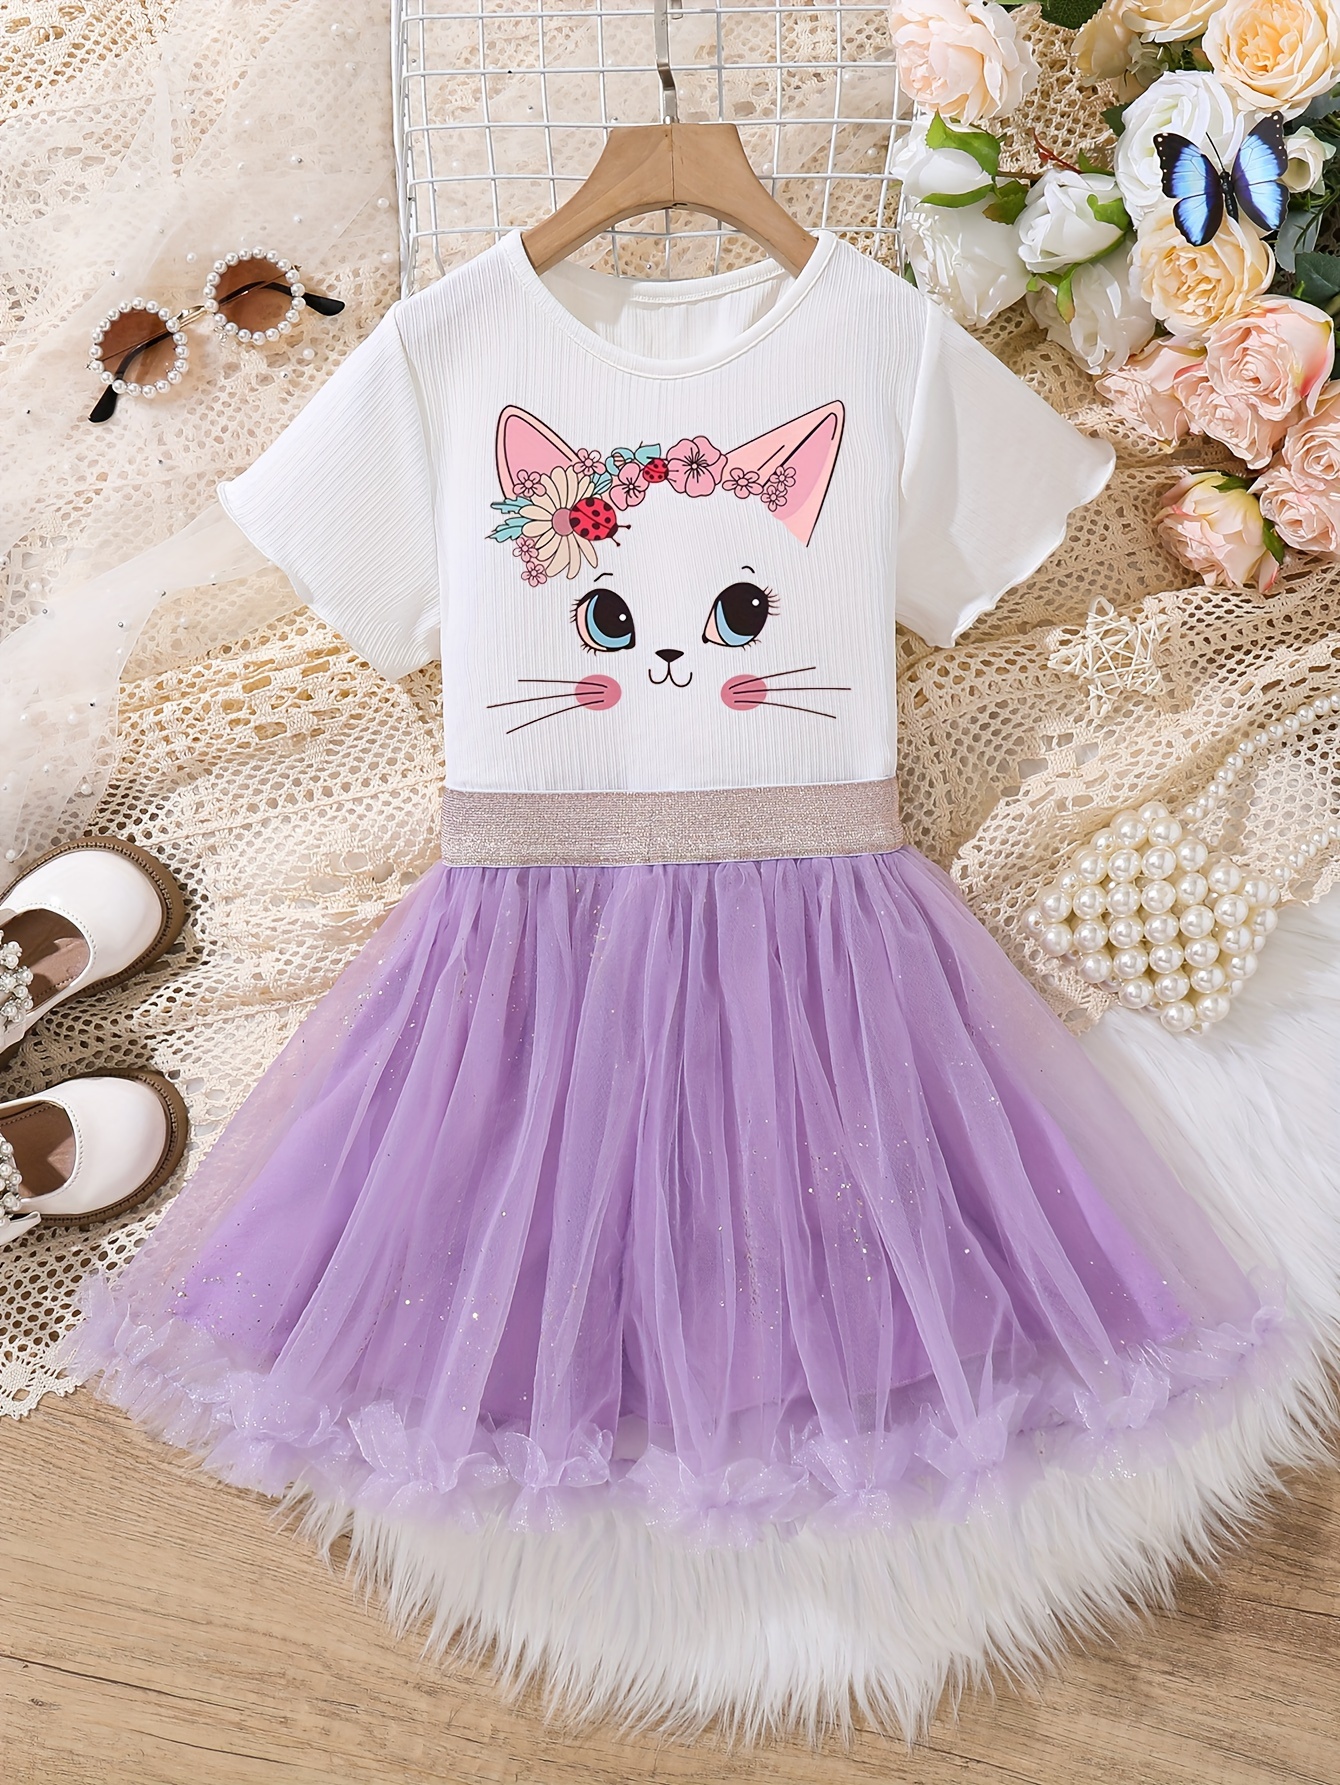  ZPINXIGN Kids Cute Clothes Cat Mushroom Dress for Girls 5-6  Summer Sleeveless Swing Dresses Kawaii Cat Outfits School Party Costume fot  Toddler,Green : Clothing, Shoes & Jewelry